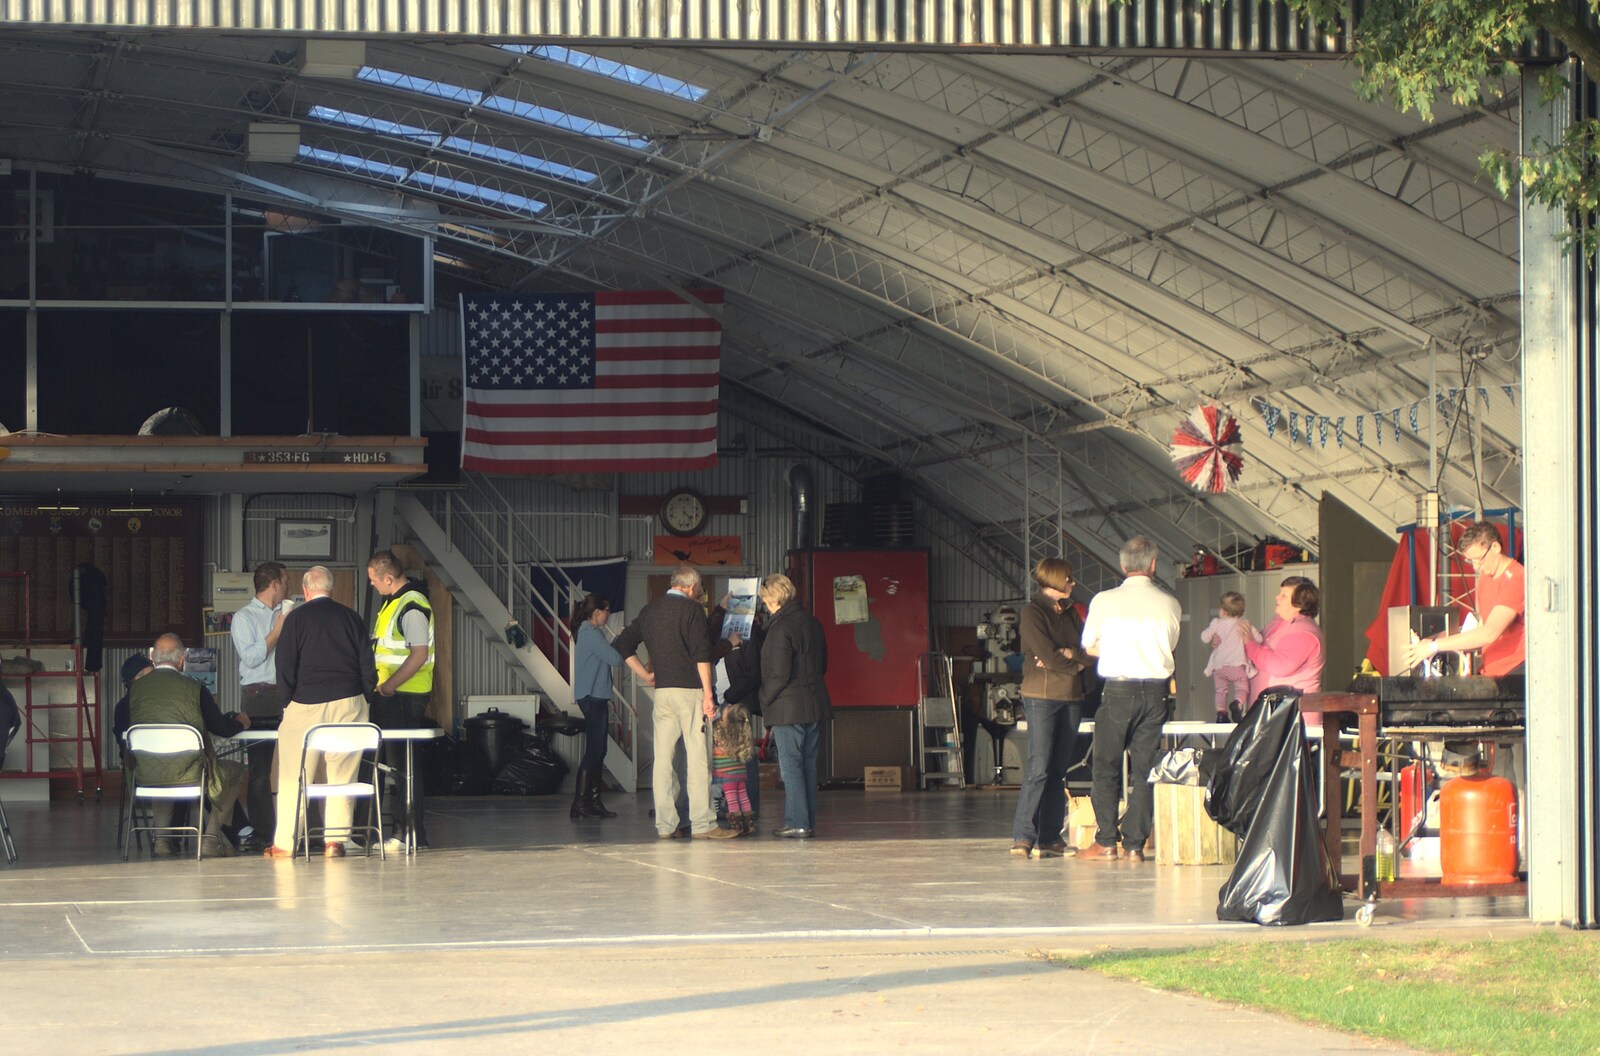 People mill around in the hangar from Another Afternoon with Janie and Marinell the Mustangs, Hardwick, Norfolk - 16th October 2011